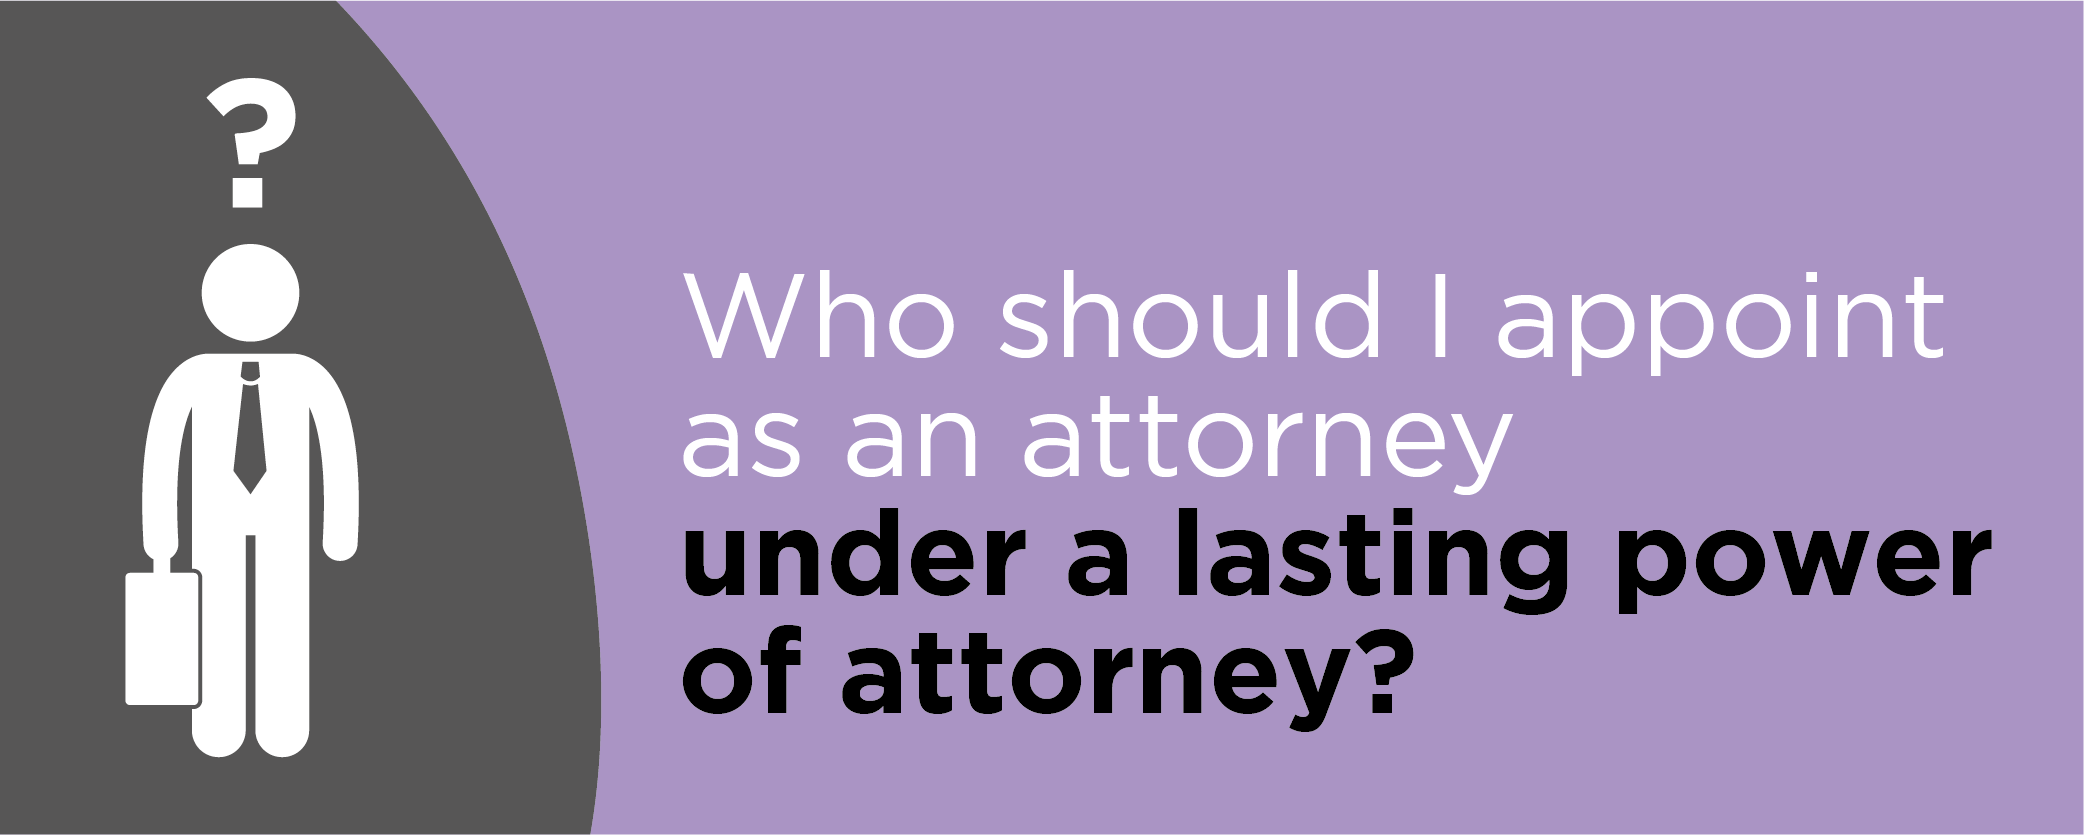 Who should I appoint as an attorney under a lasting power of attorney?